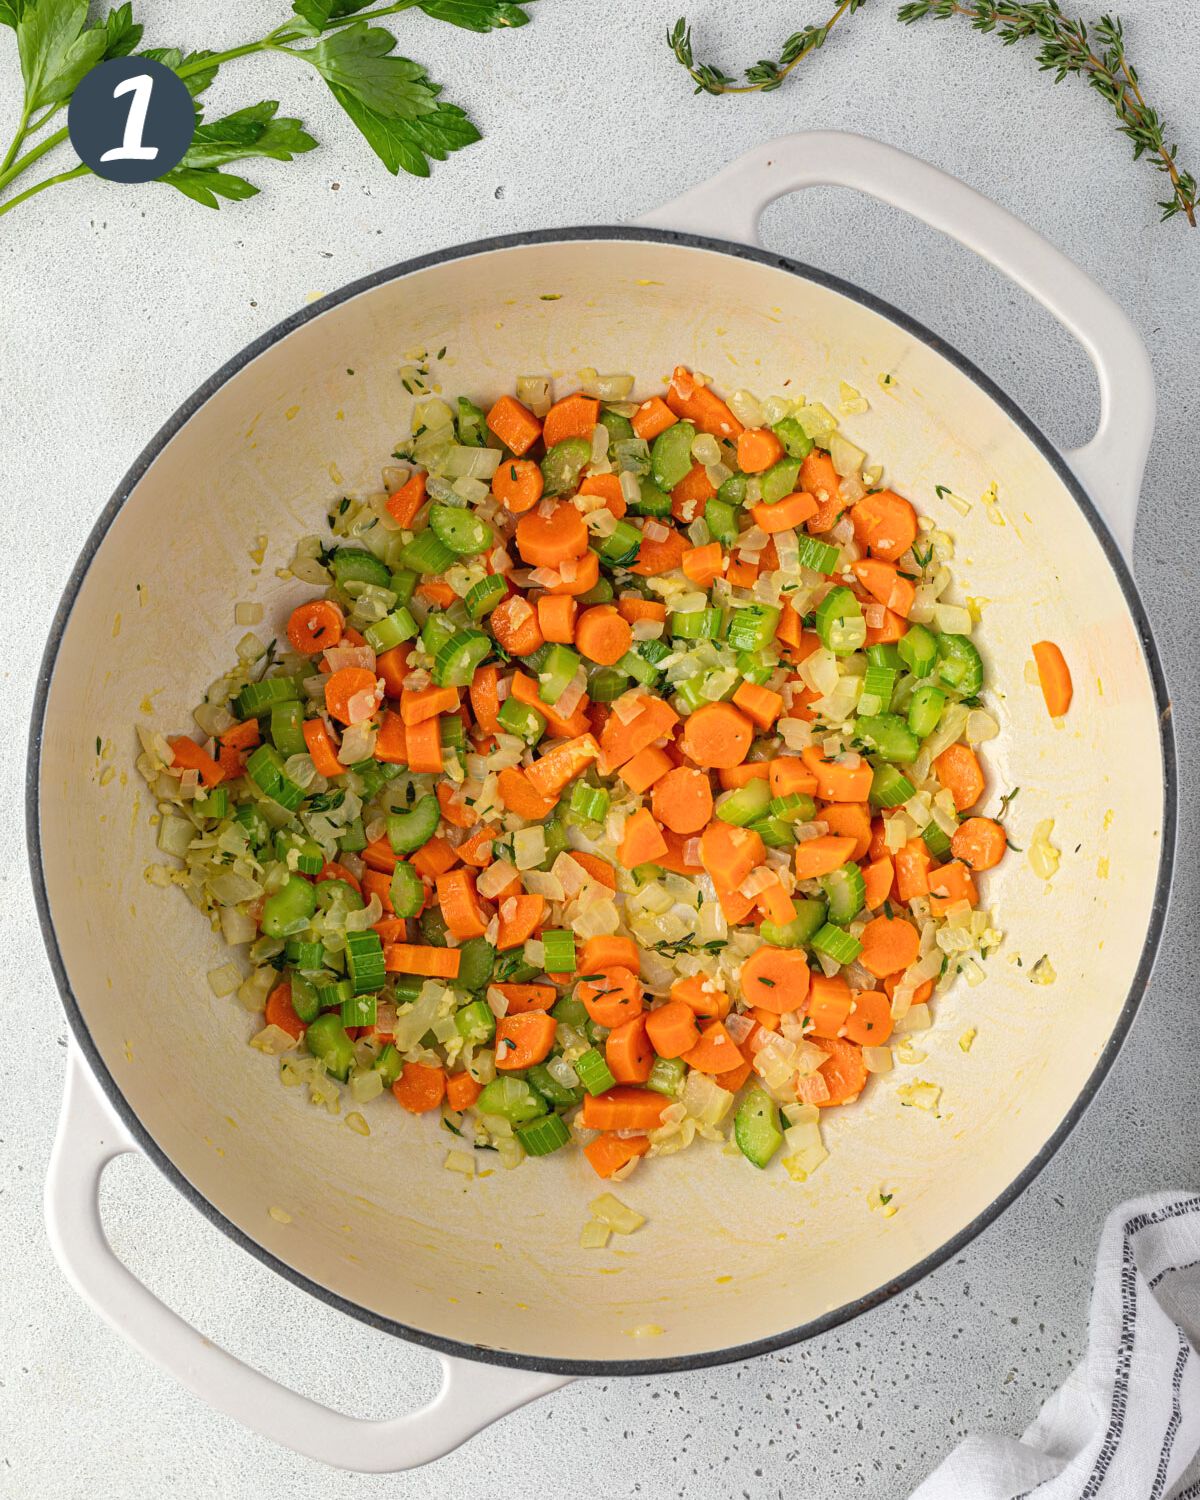 Mirepoux (chopped carrots, celery, and onions) in a dutch oven.